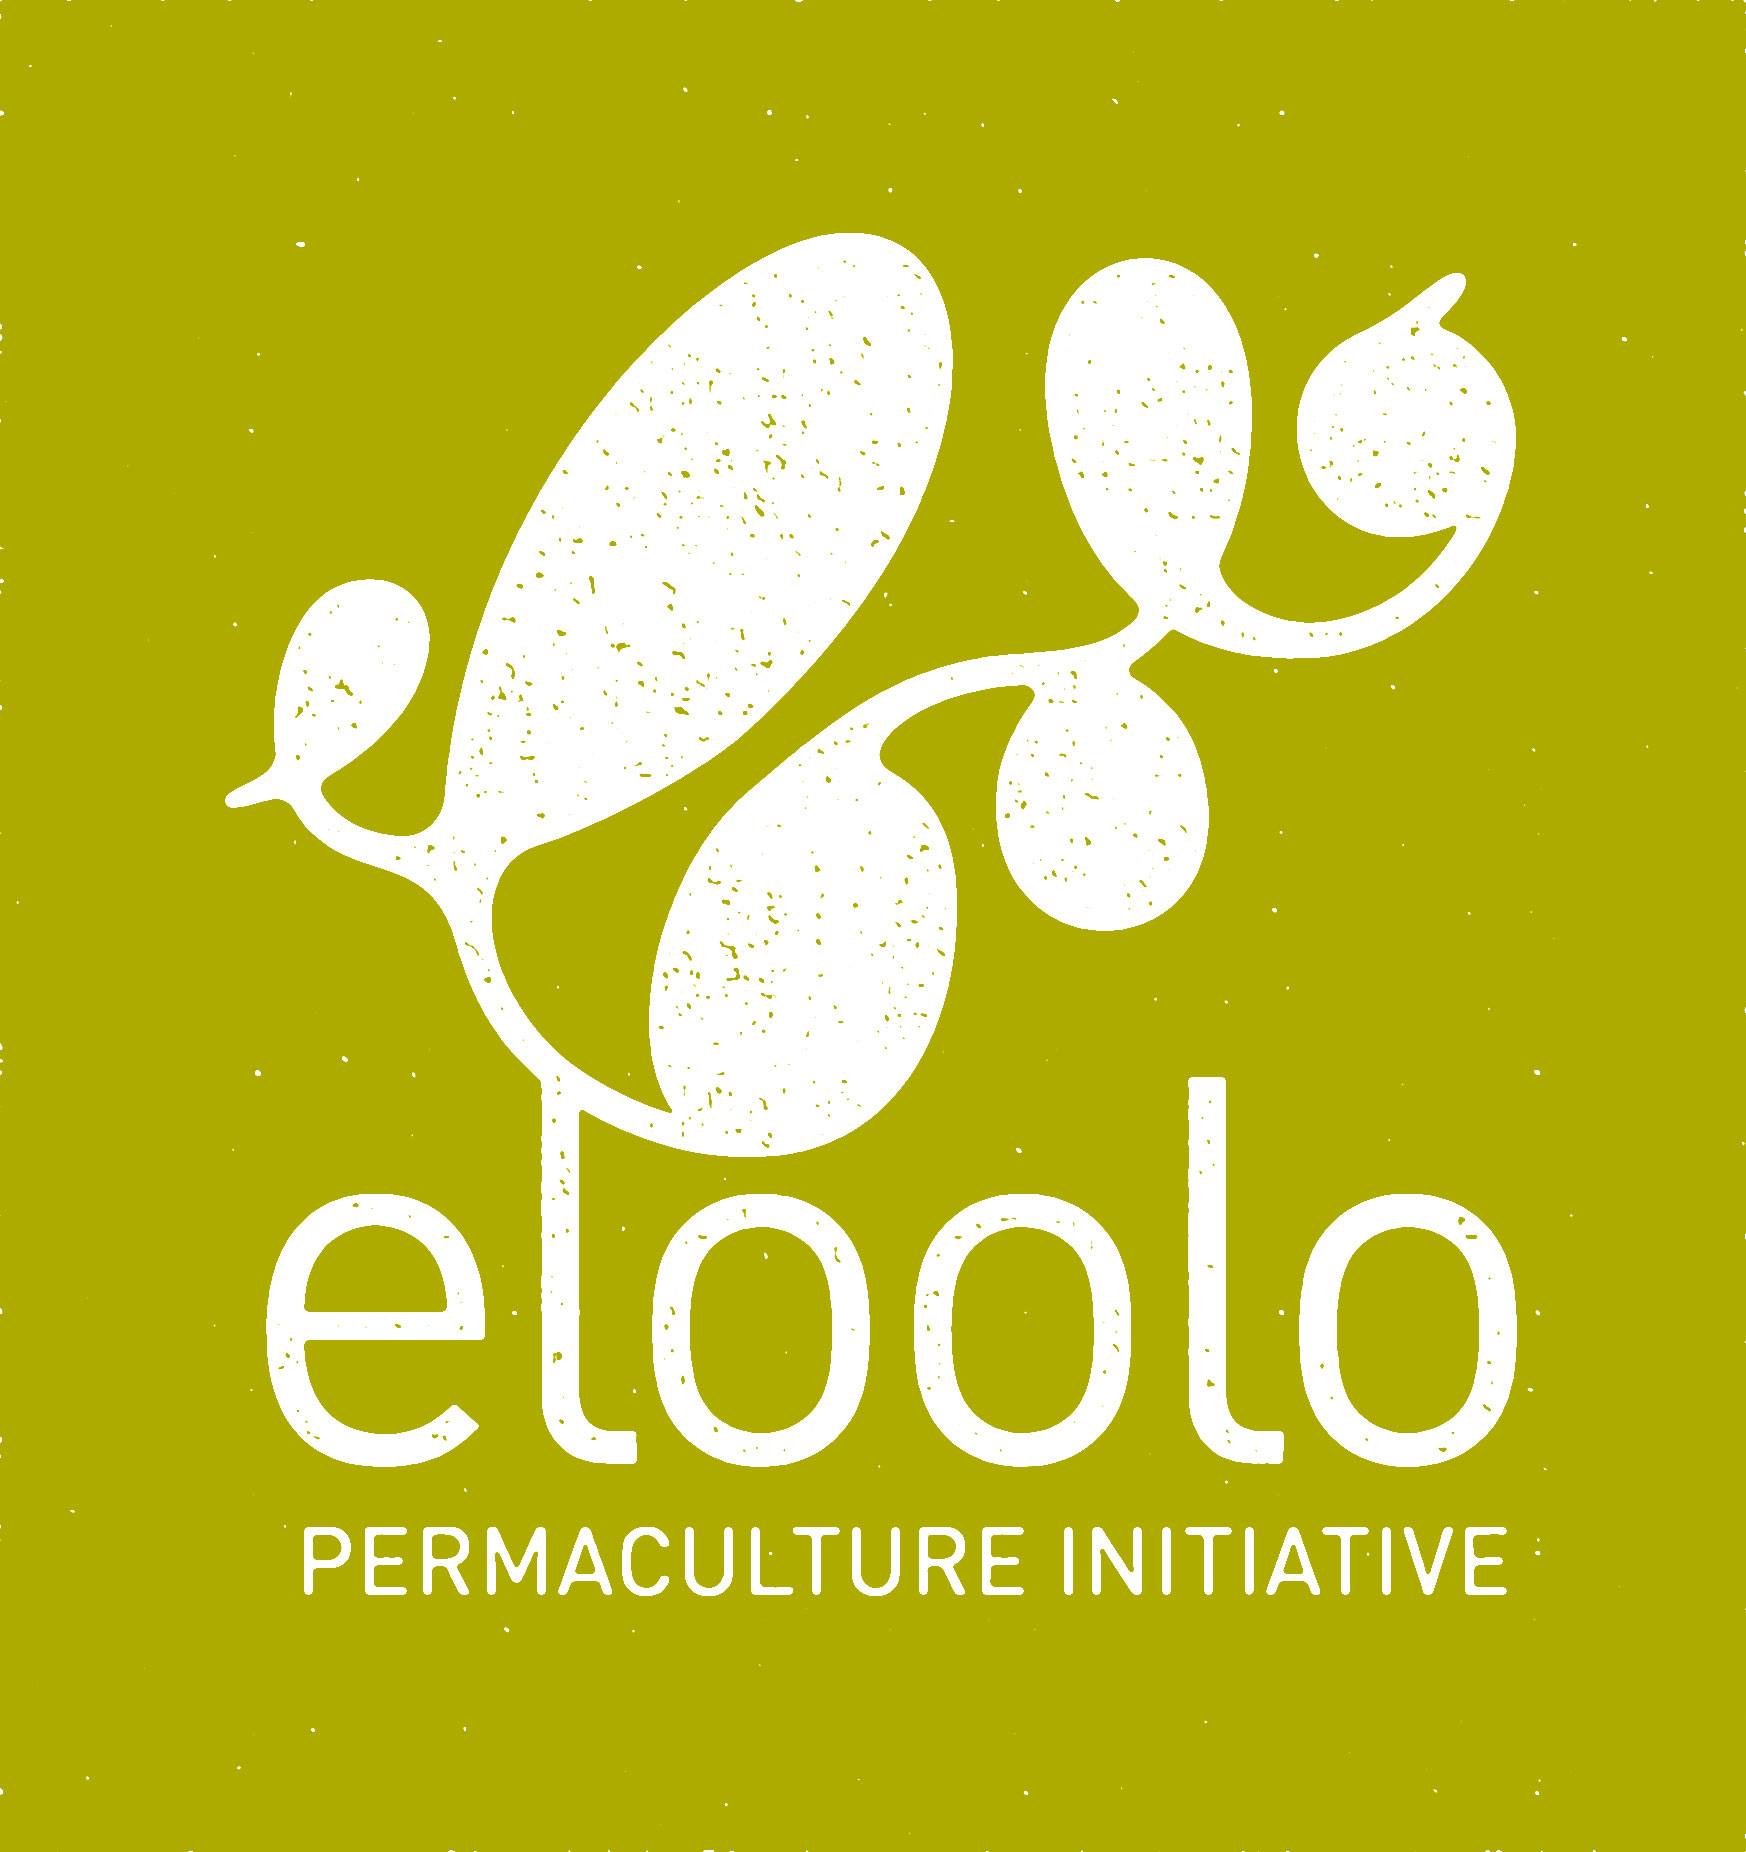 Eloolo Permaculture Initiative